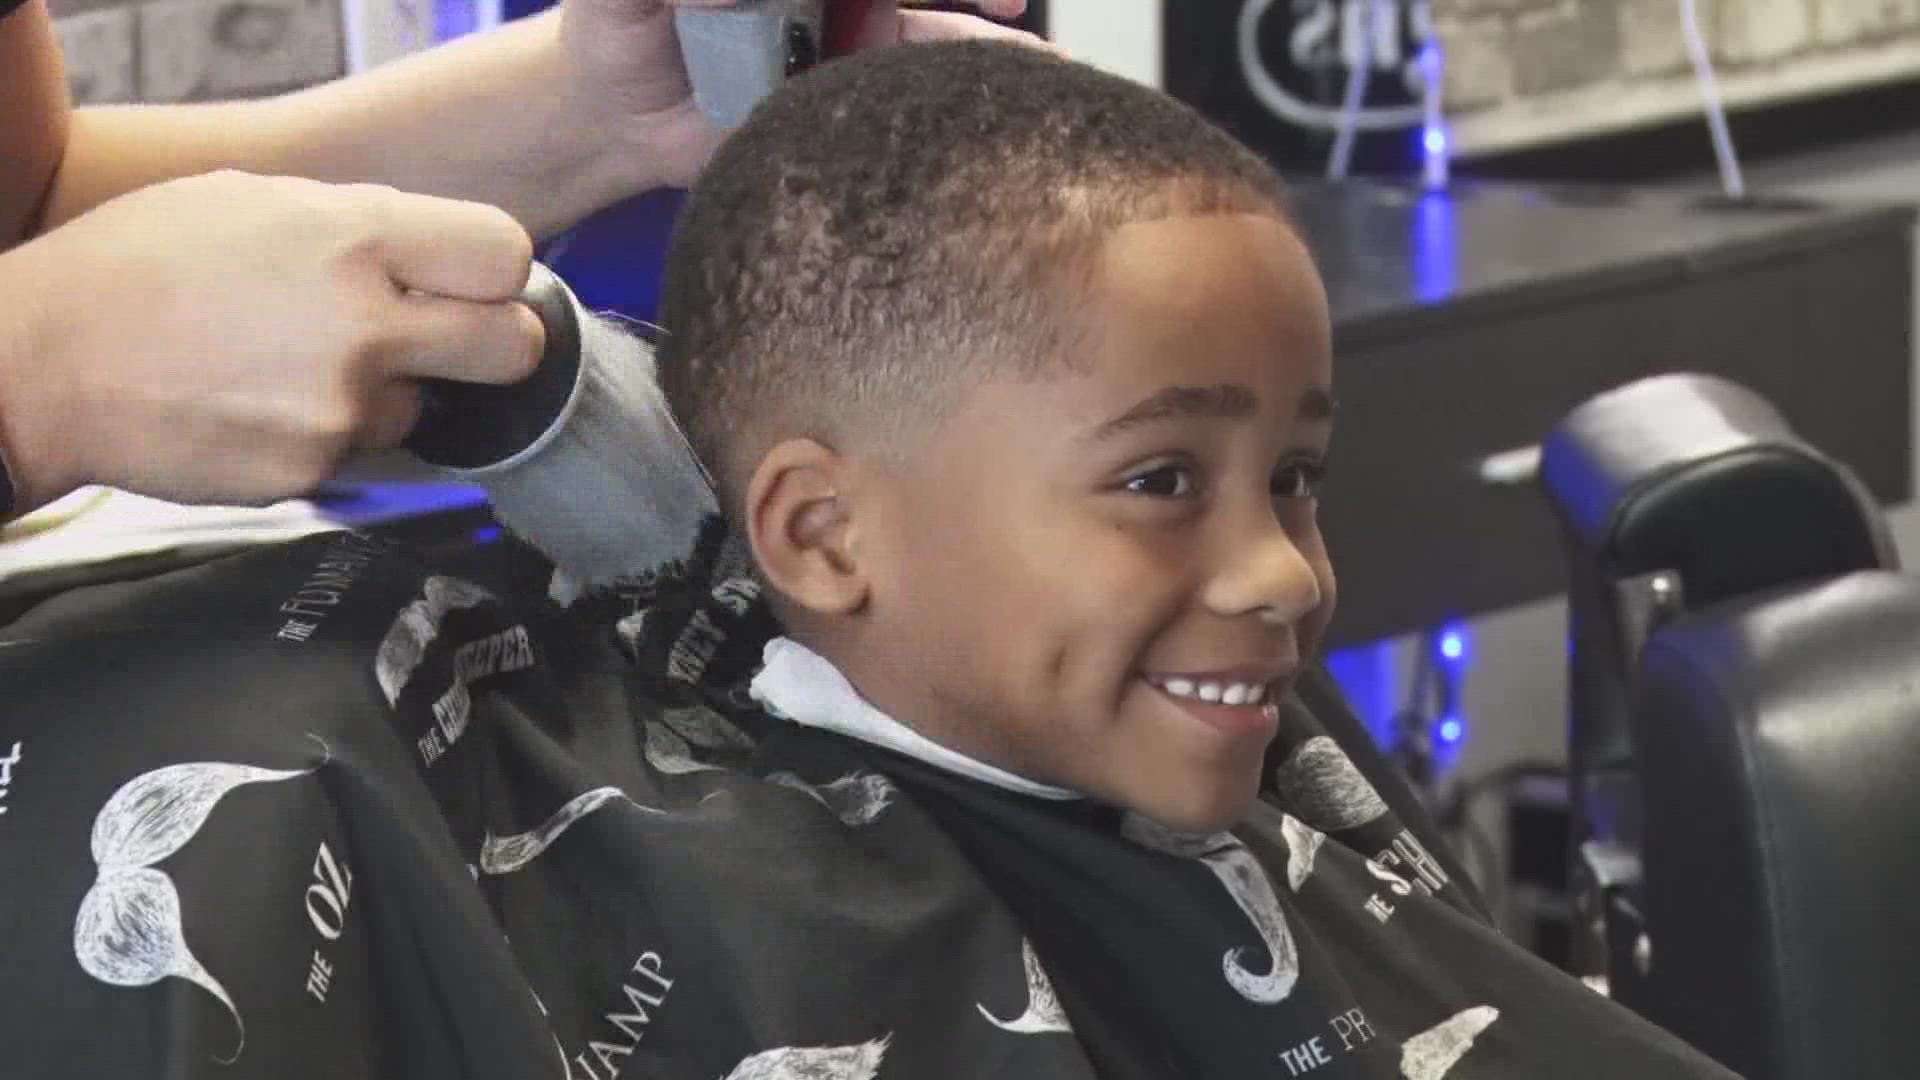 Inspired Designs salon holds school drive for local shelter kids |  